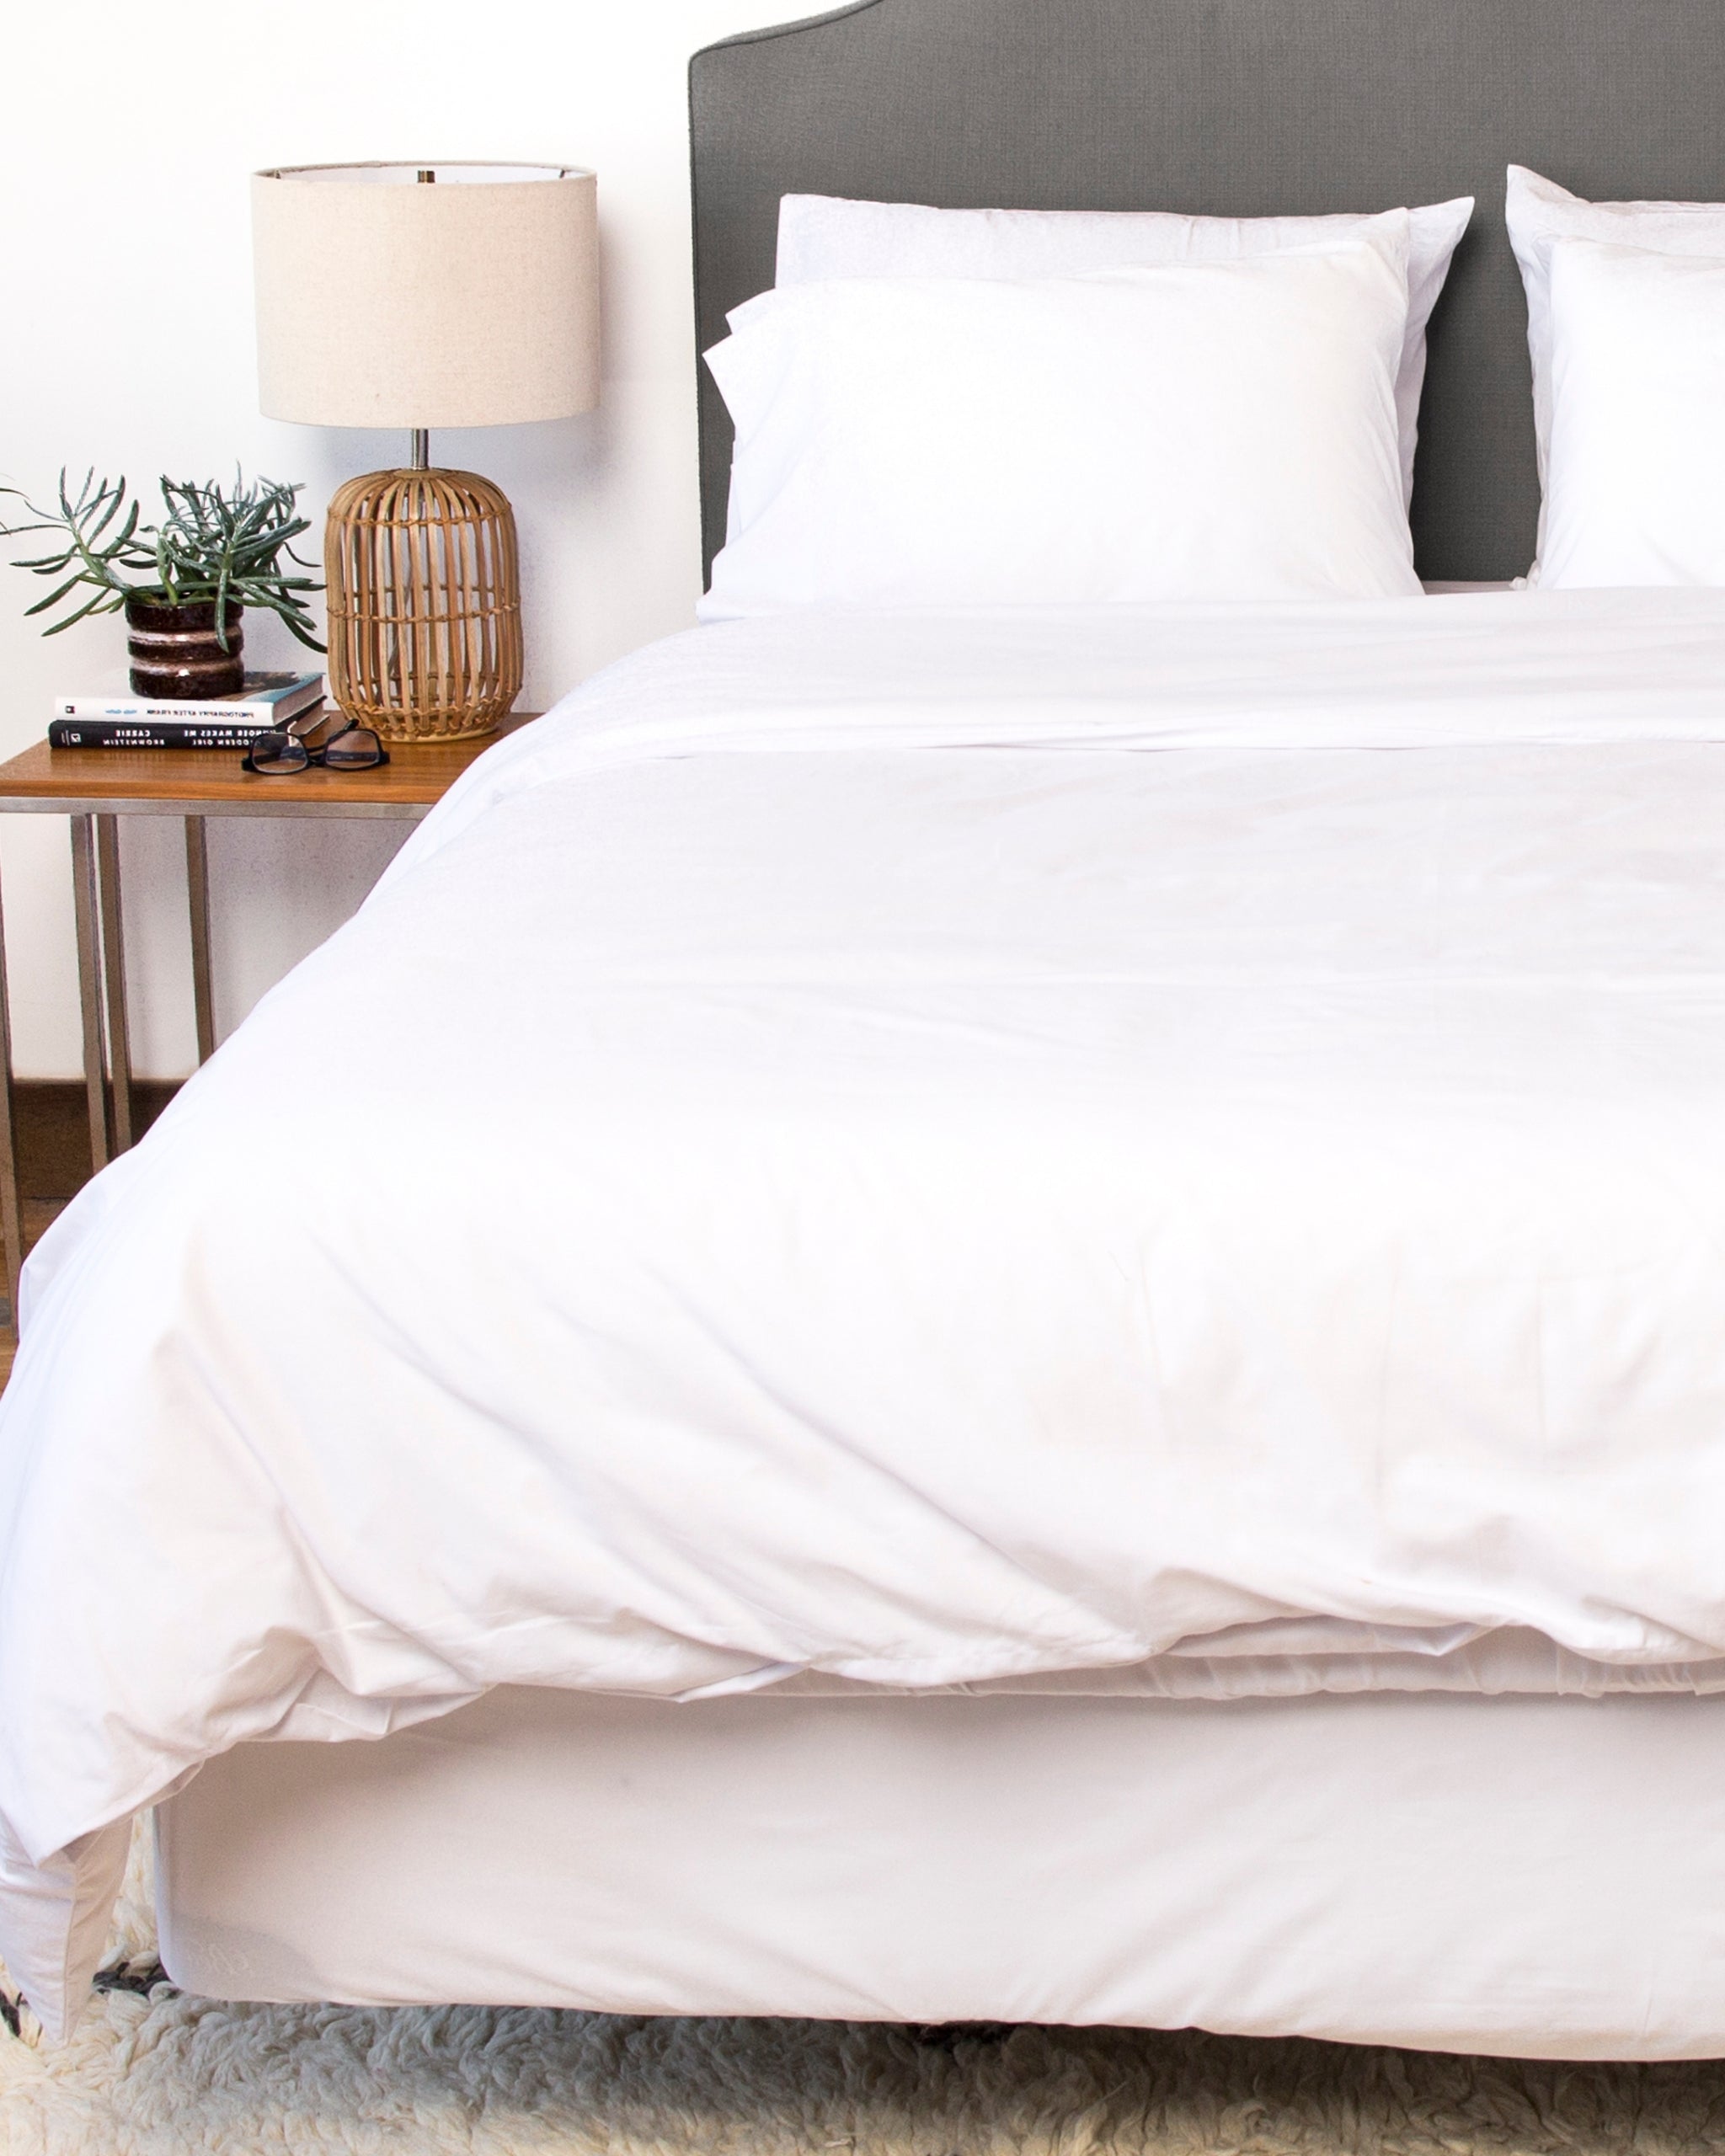 White cotton sheets and duvet cover on a bed. 